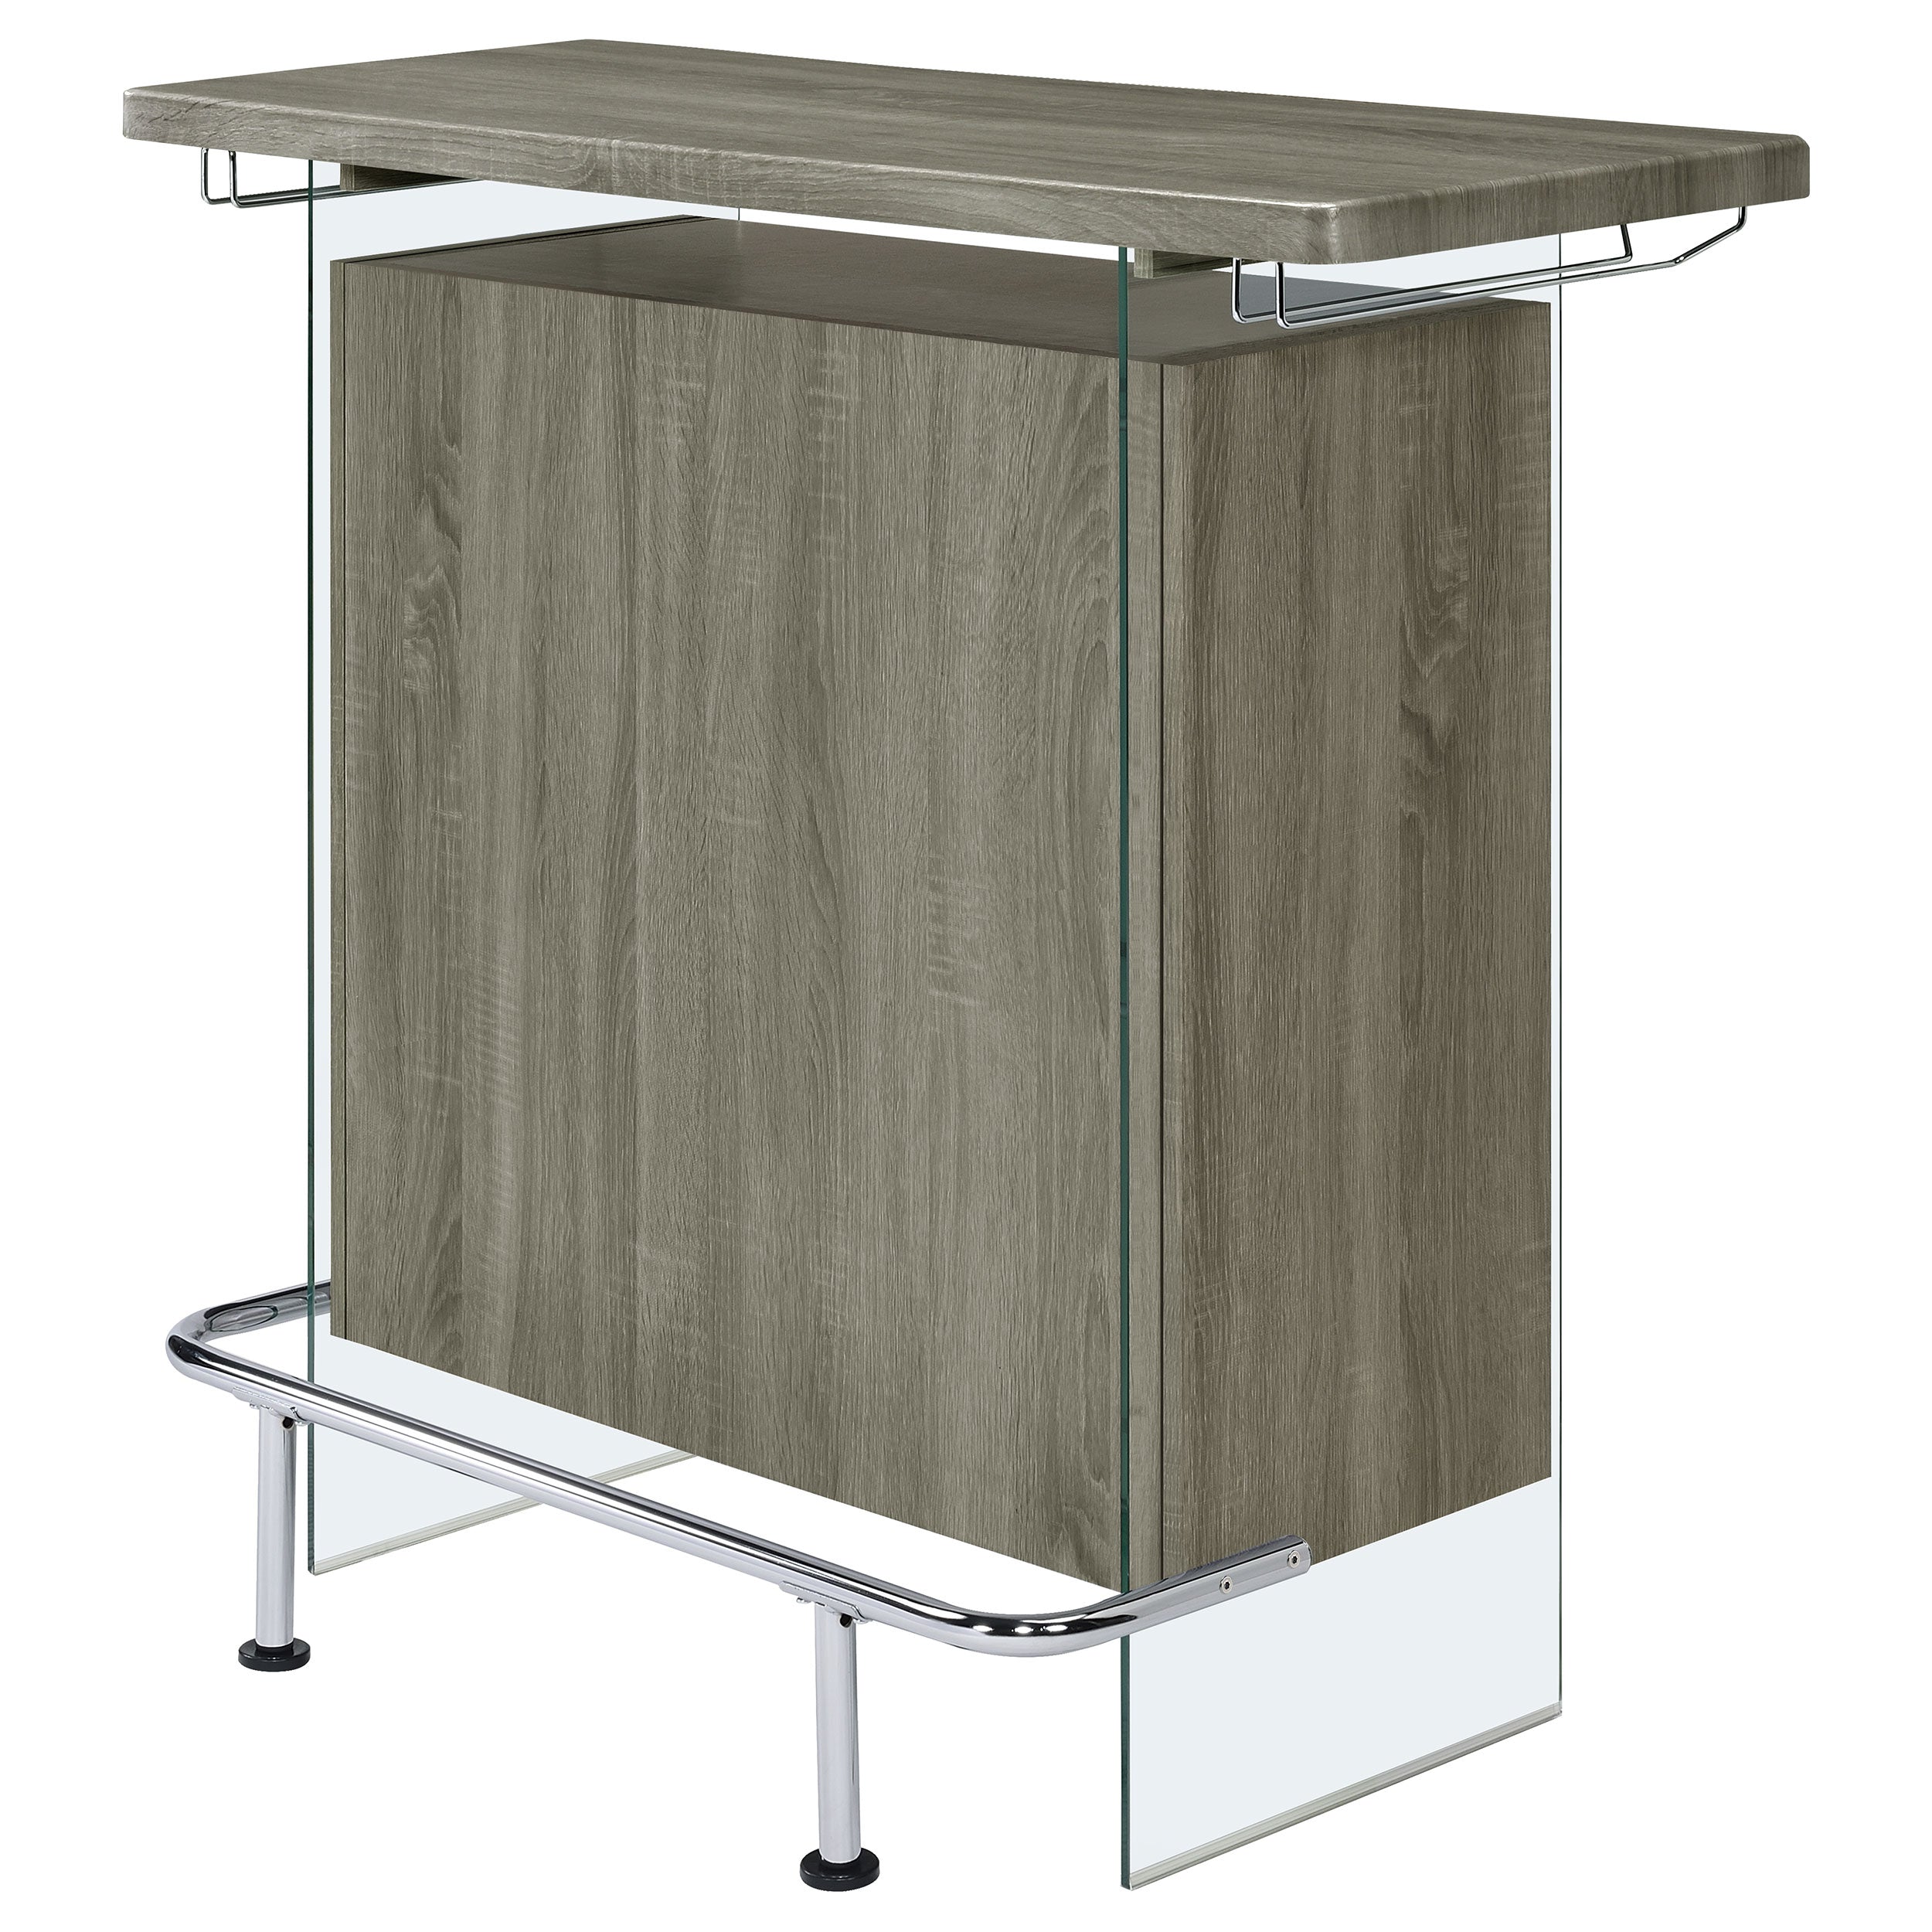 Acosta Rectangular Bar Unit with Footrest and Glass Side Panels Home Bar Grey